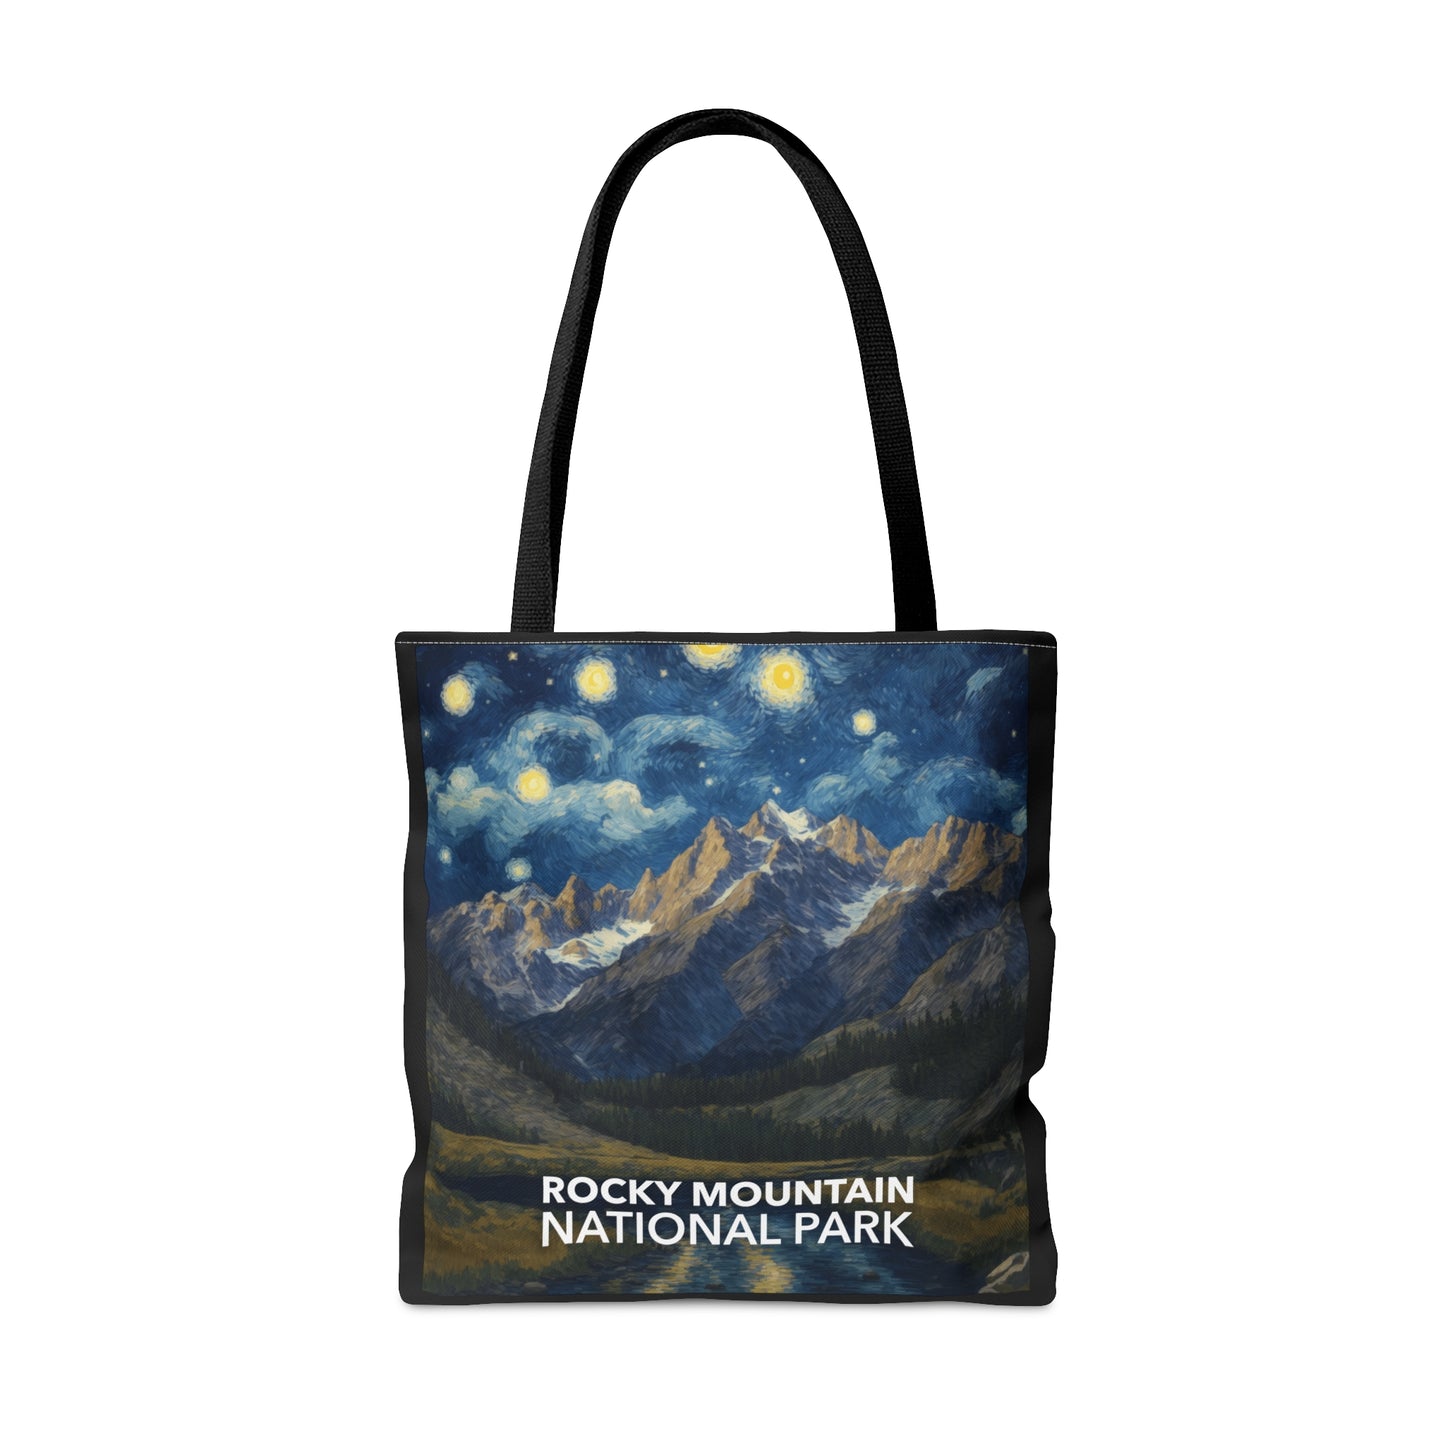 Rocky Mountain National Park Tote Bag - The Starry Night